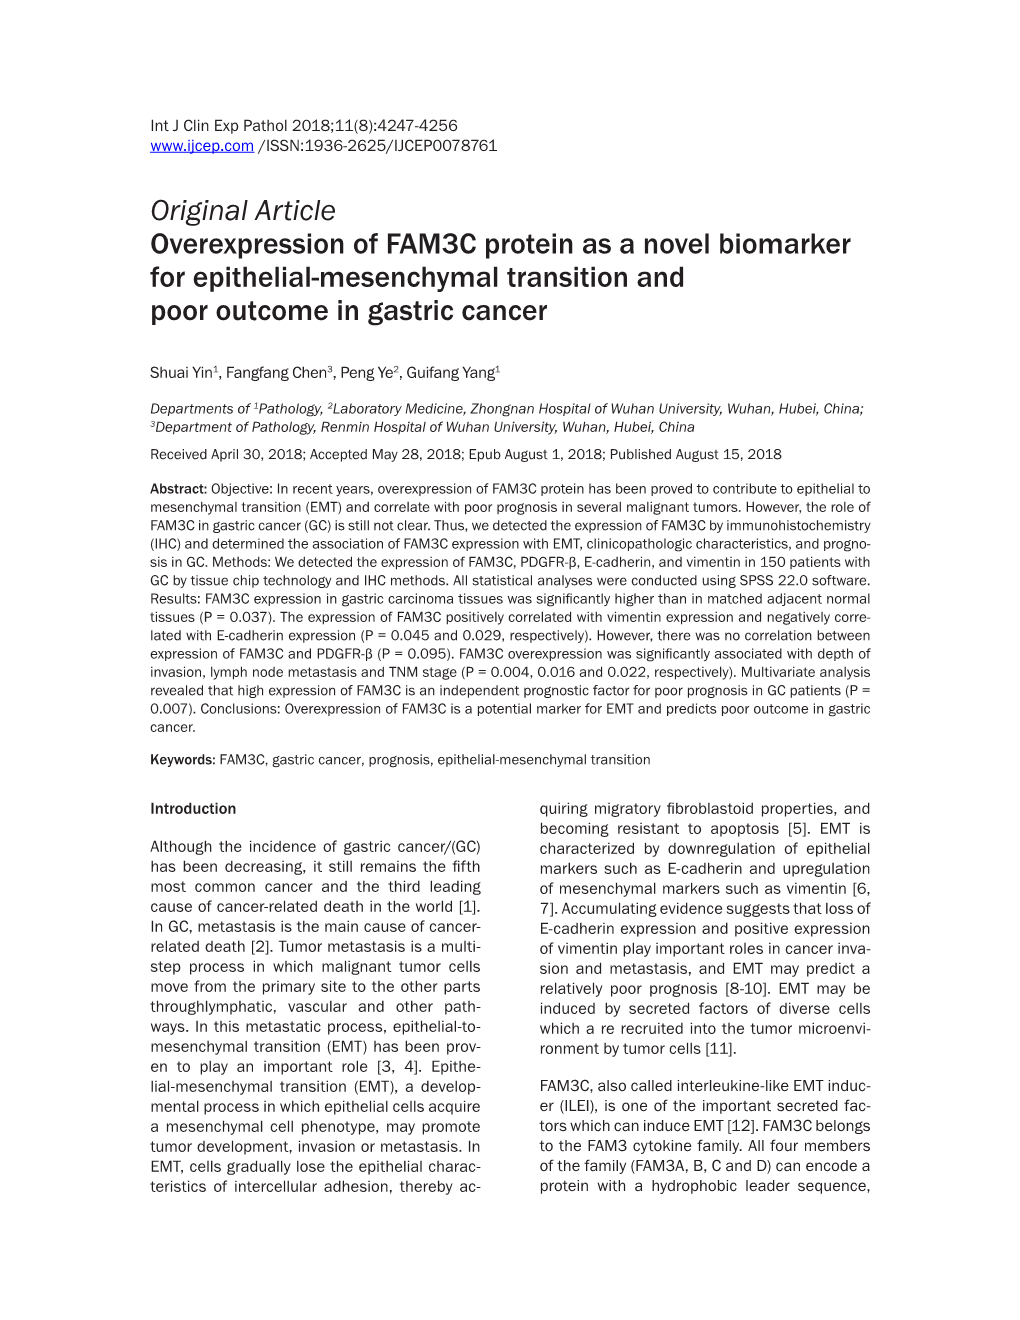 Original Article Overexpression of FAM3C Protein As a Novel Biomarker for Epithelial-Mesenchymal Transition and Poor Outcome in Gastric Cancer